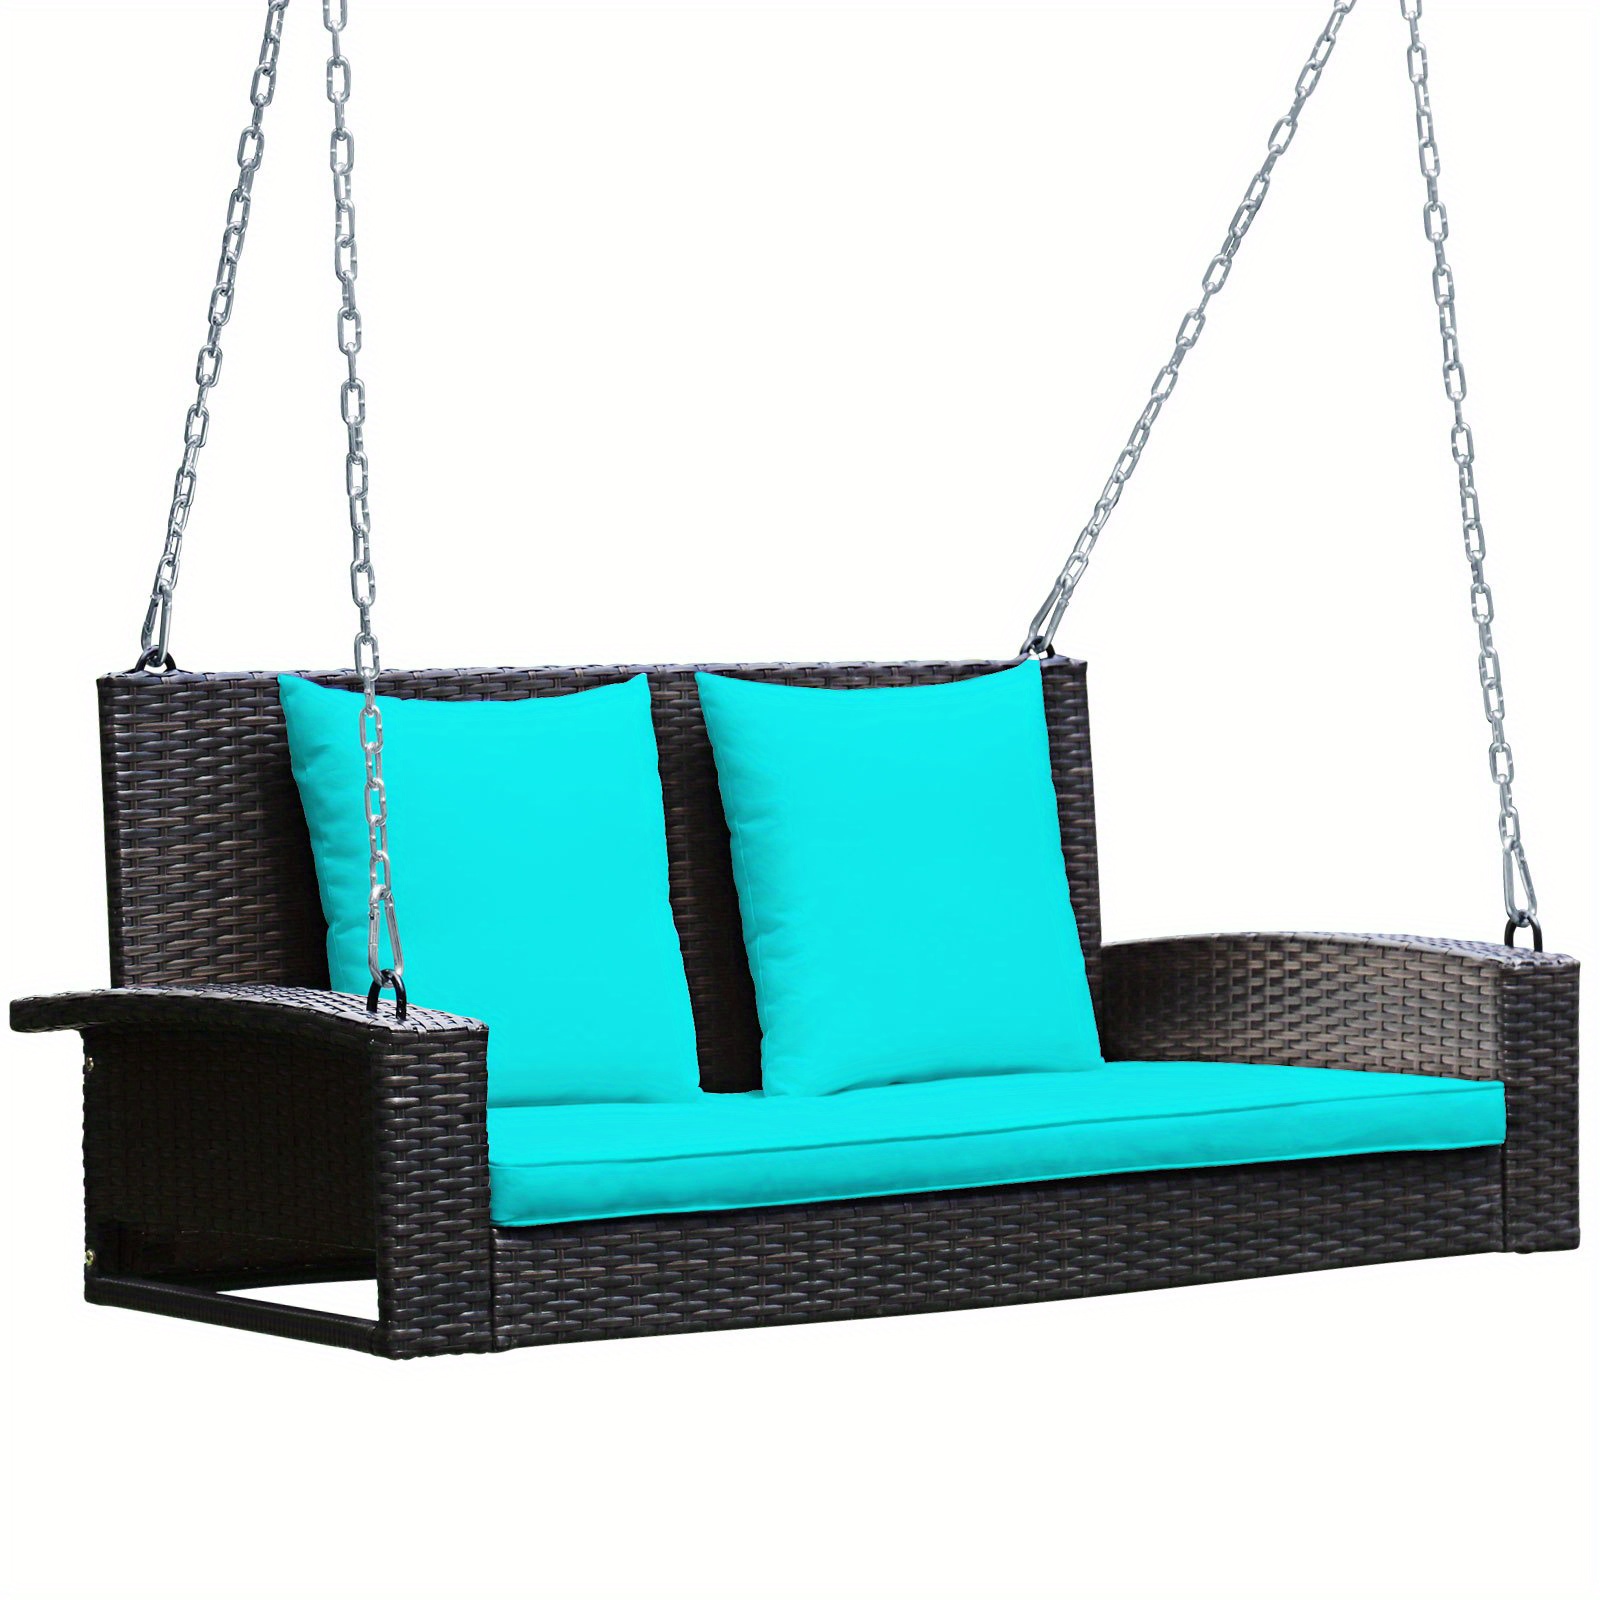 

Costway 2-person Patio Rattan Hanging Porch Swing Bench Chair Cushion Turquoise